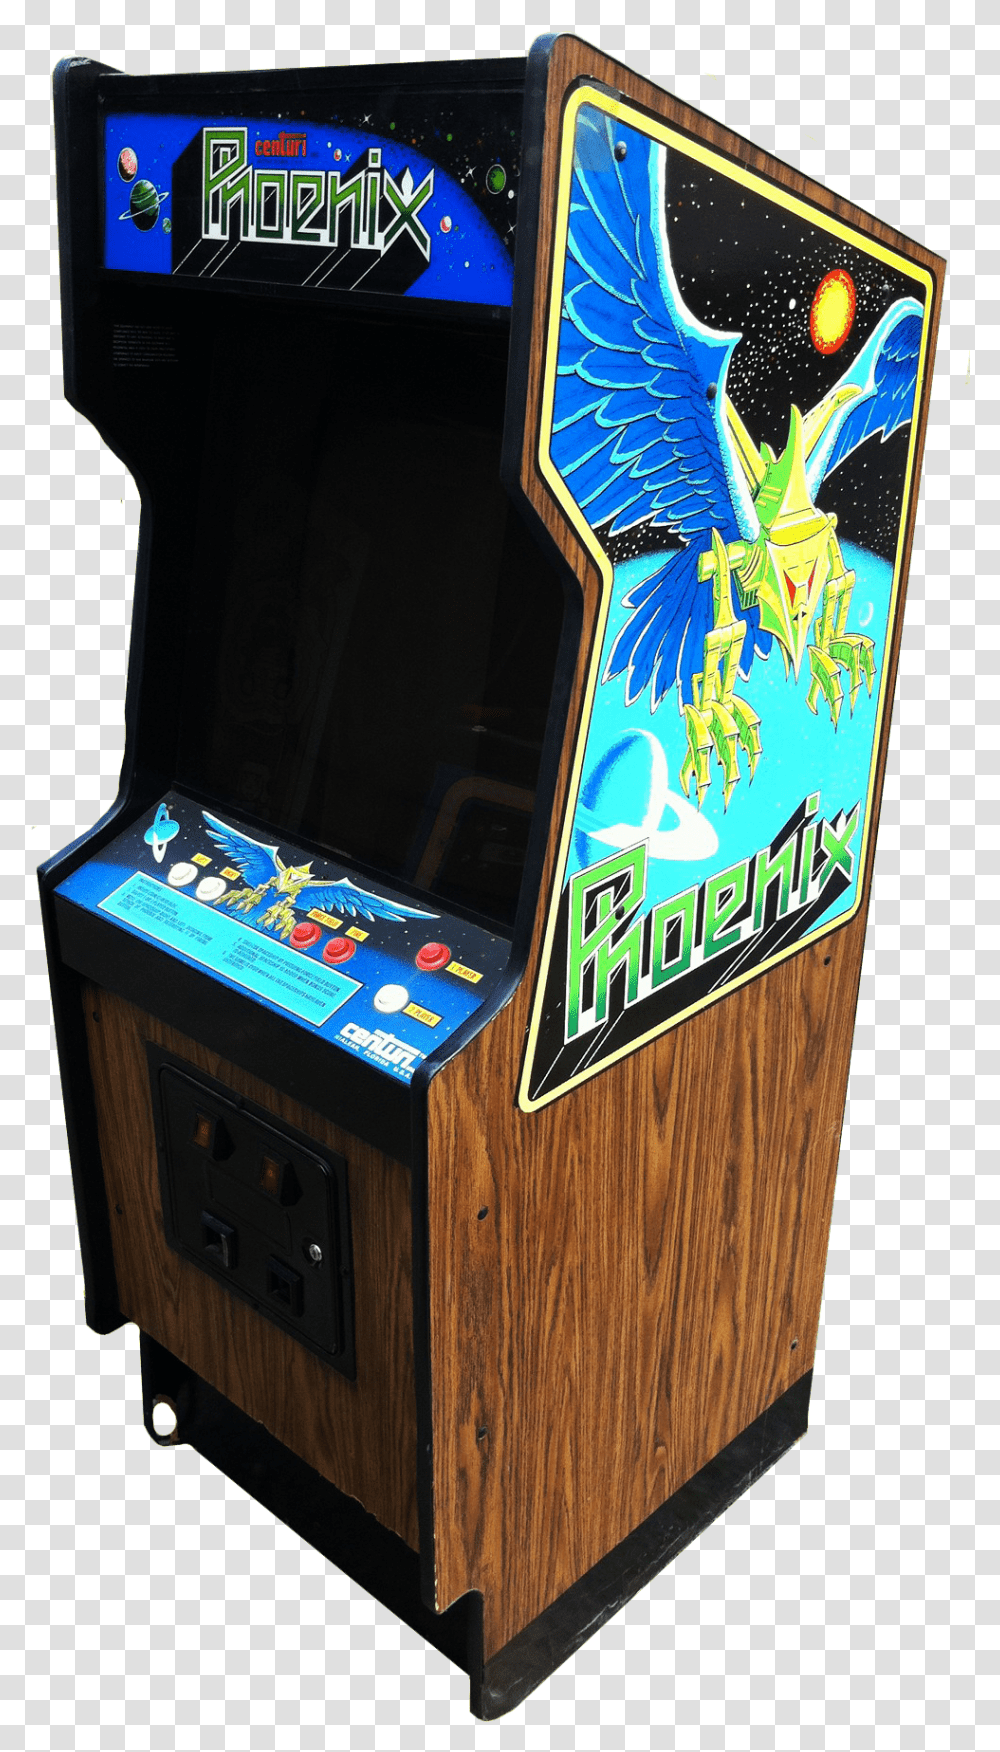 Phoenix Arcade Cabinet Phoenix Arcade Cabinet Plans, Arcade Game Machine, Mobile Phone, Electronics, Cell Phone Transparent Png